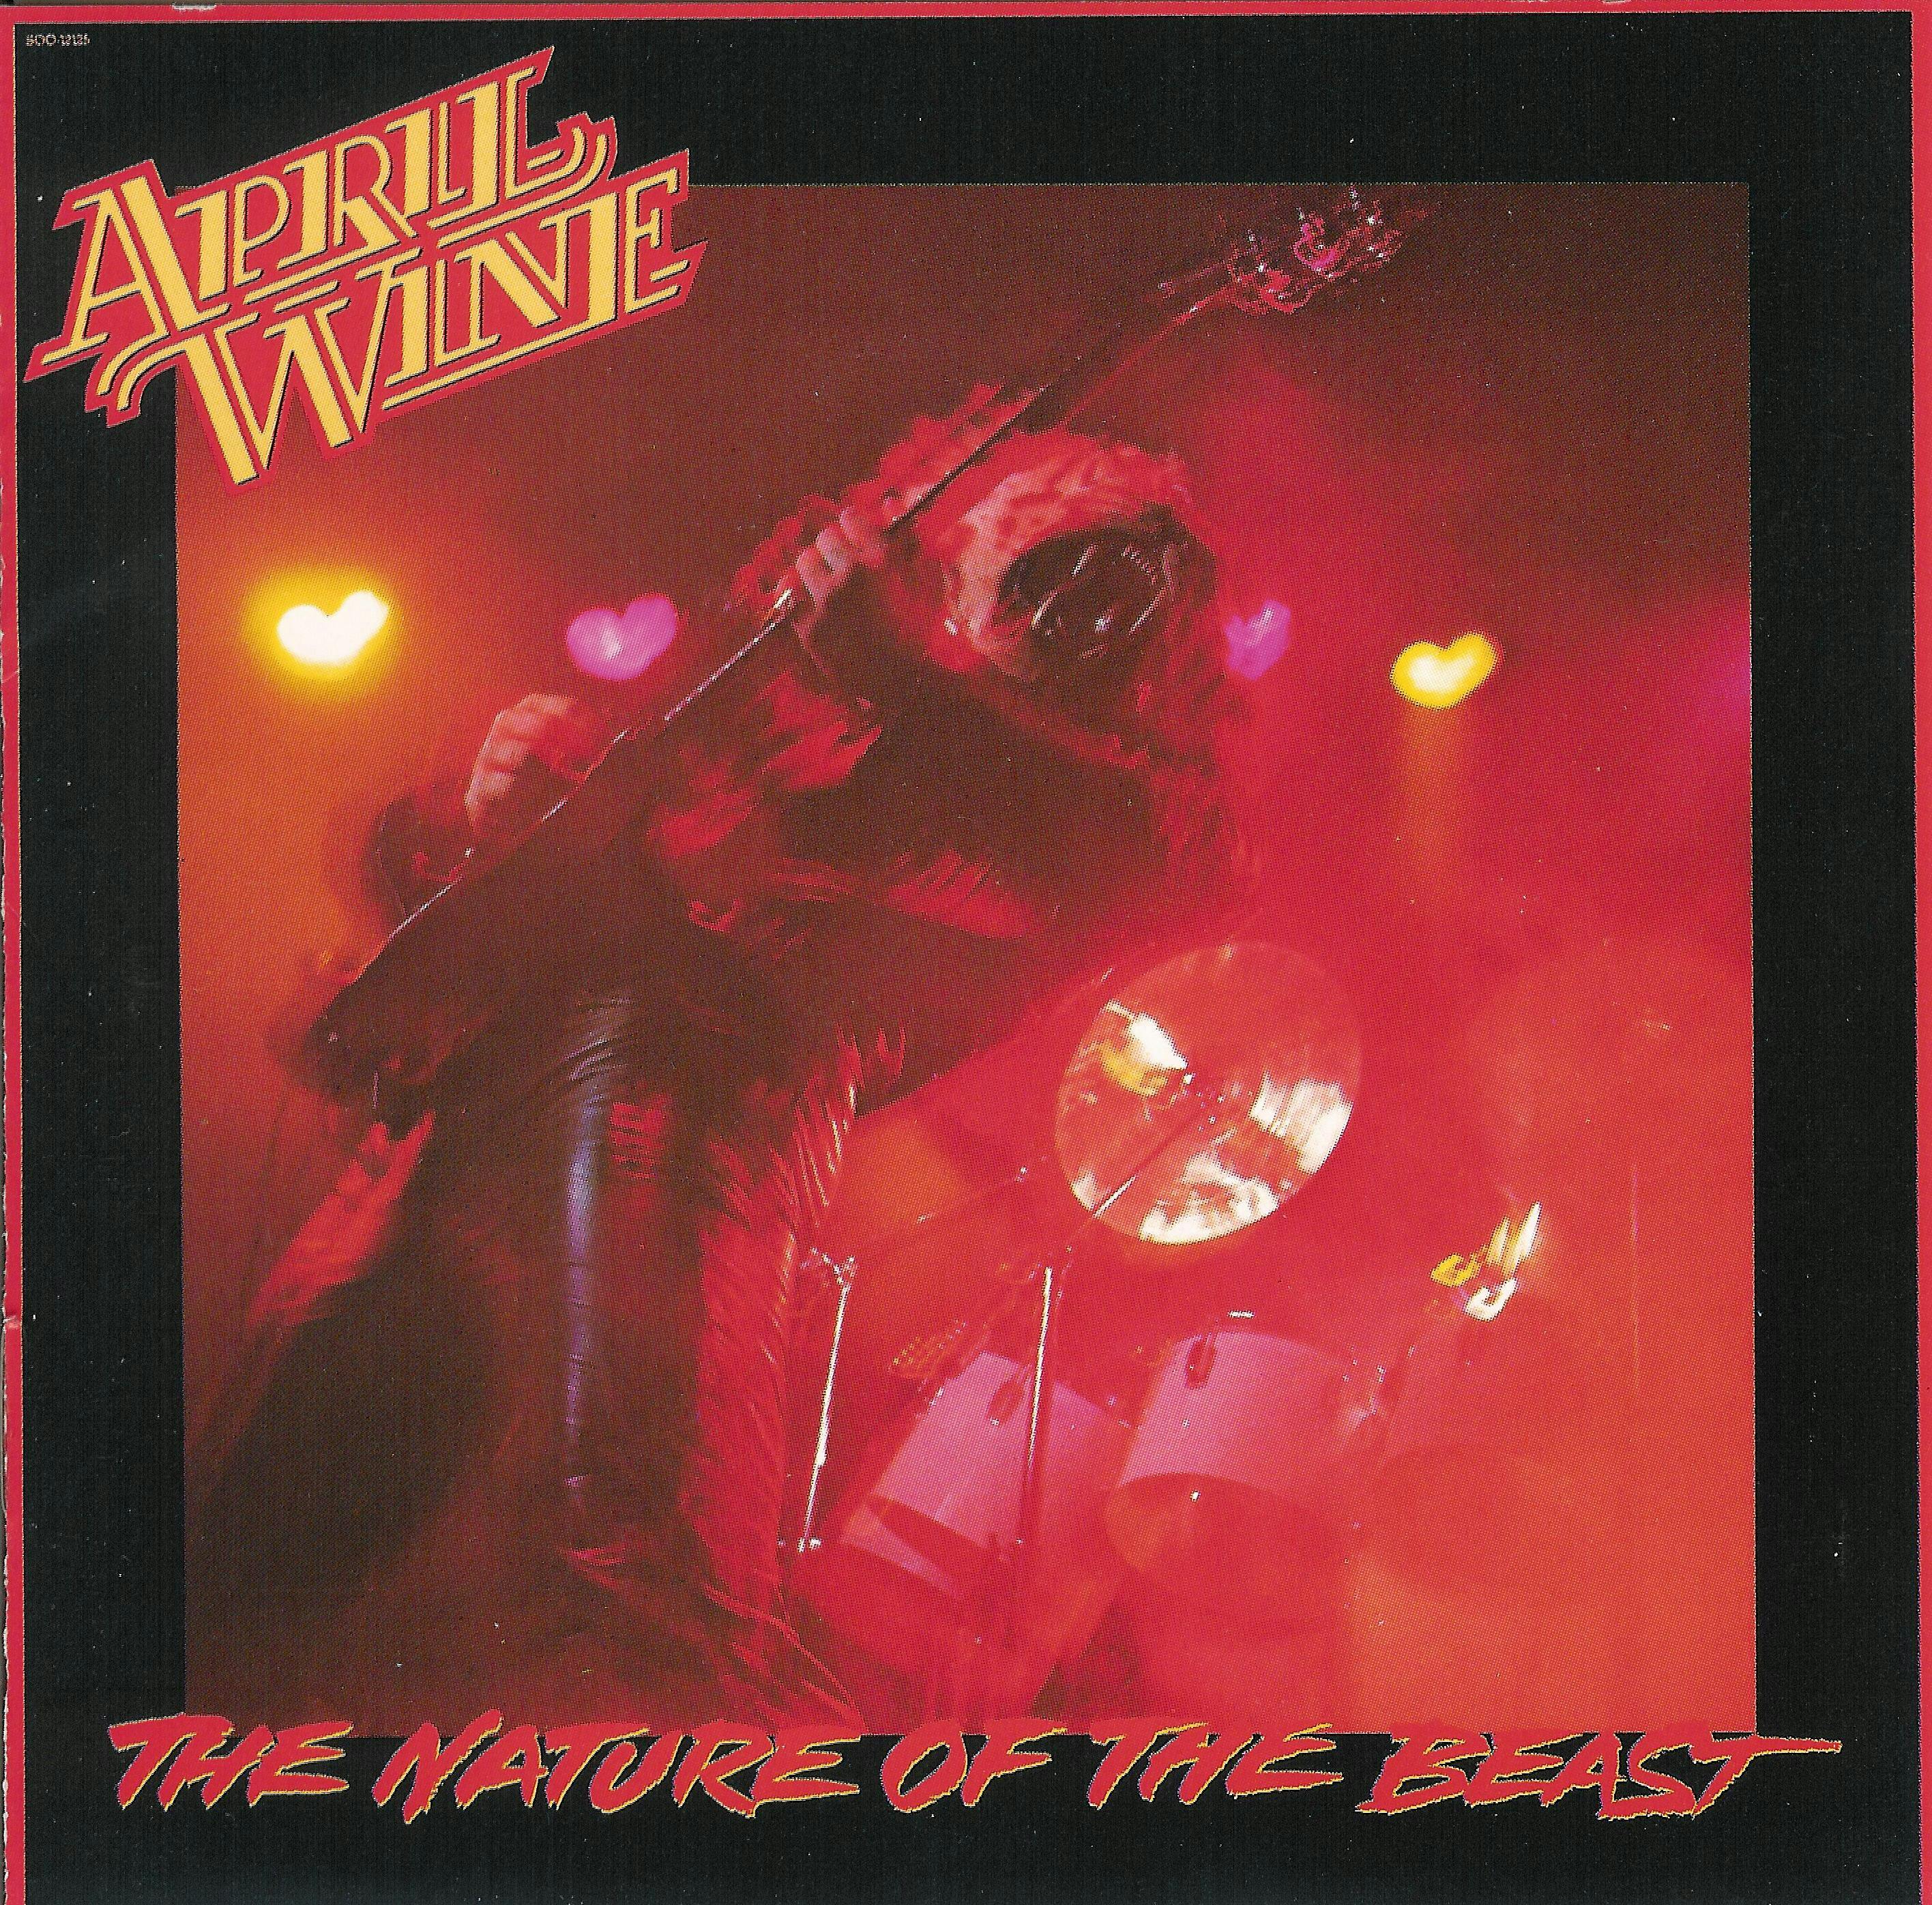 9. DAY BY DAY: APRIL WINE - THE NATURE OF THE BEAST